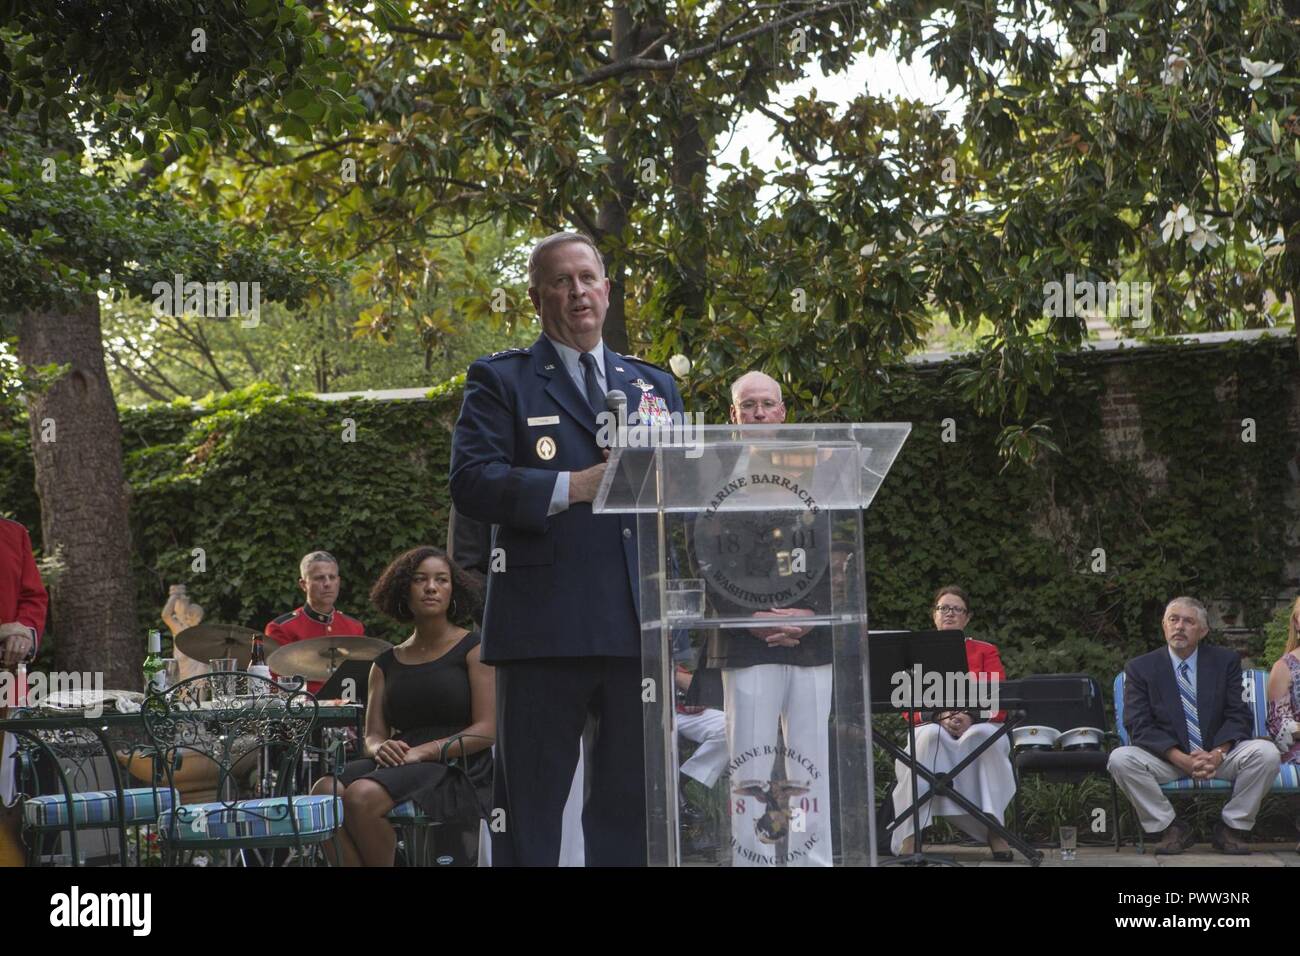 U.S. Air Force Lt. Gen. Thomas J. Trask, vice commander of Headquarters U.S. Special Operations Command (SOCOM), gives remarks during the evening parade reception at Marine Barracks Washington, Washington, D.C., June 23, 2017. Evening parades are held as a means of honoring senior officials, distinguished citizens and supporters of the Marine Corps. Stock Photo